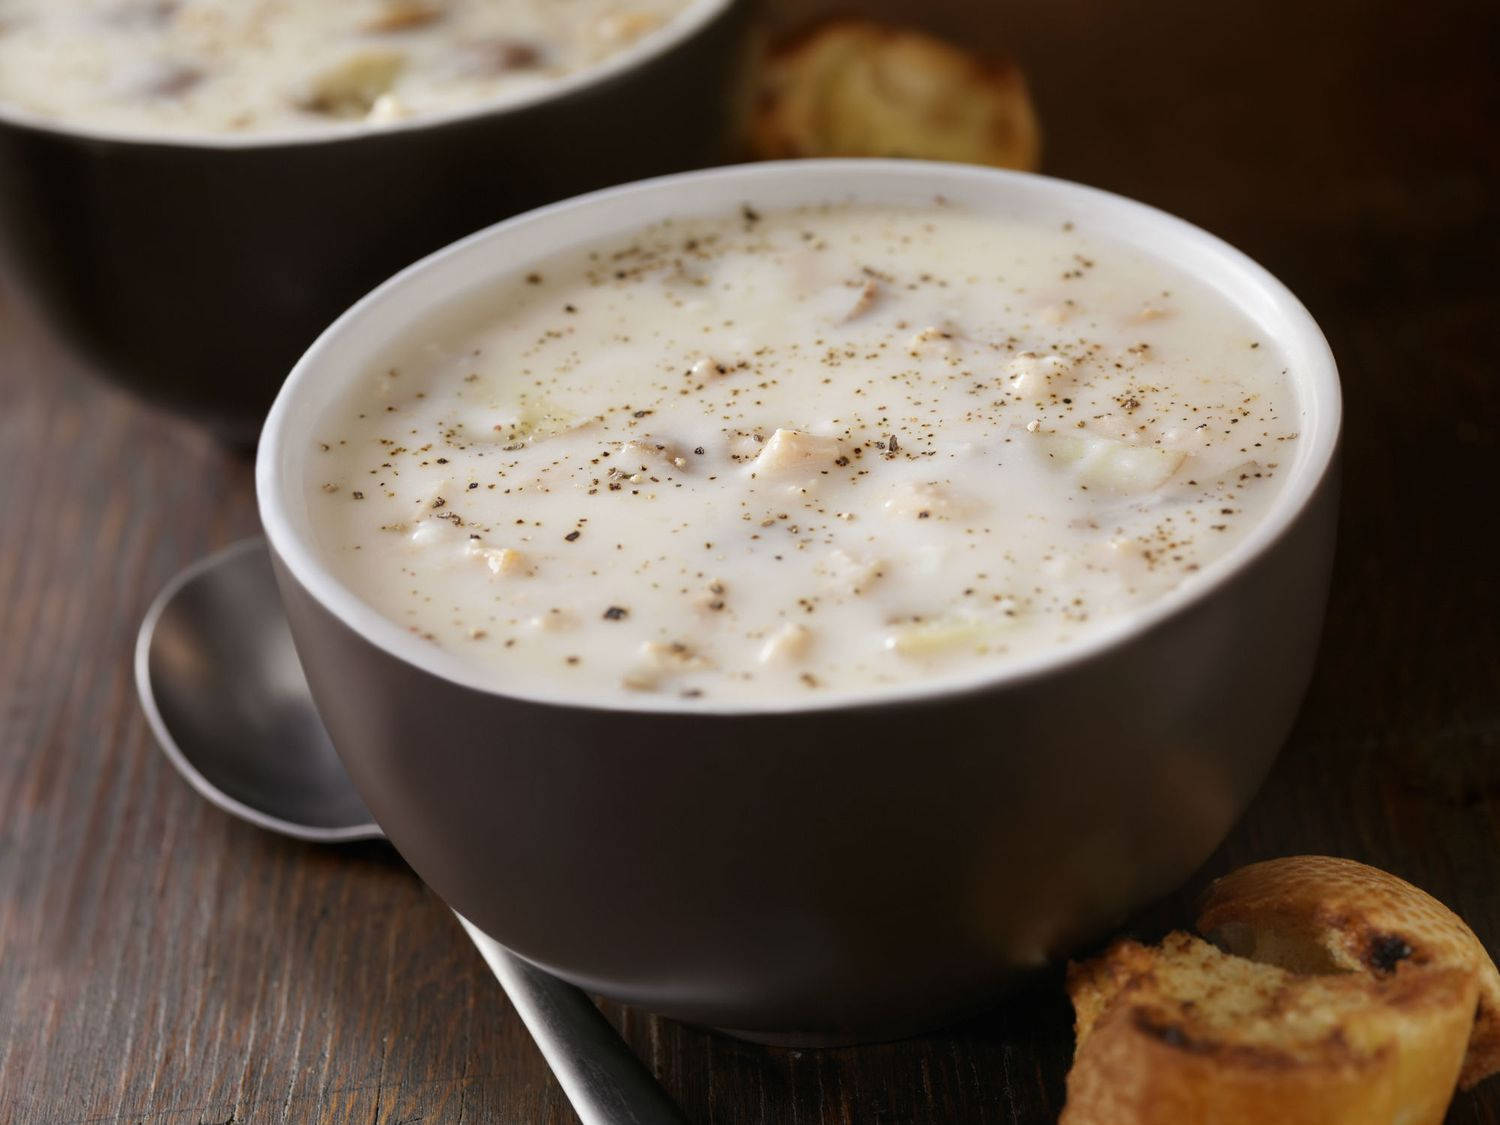 Caption: A Warm Bowl of New England Clam Chowder with Toasted Bread Wallpaper